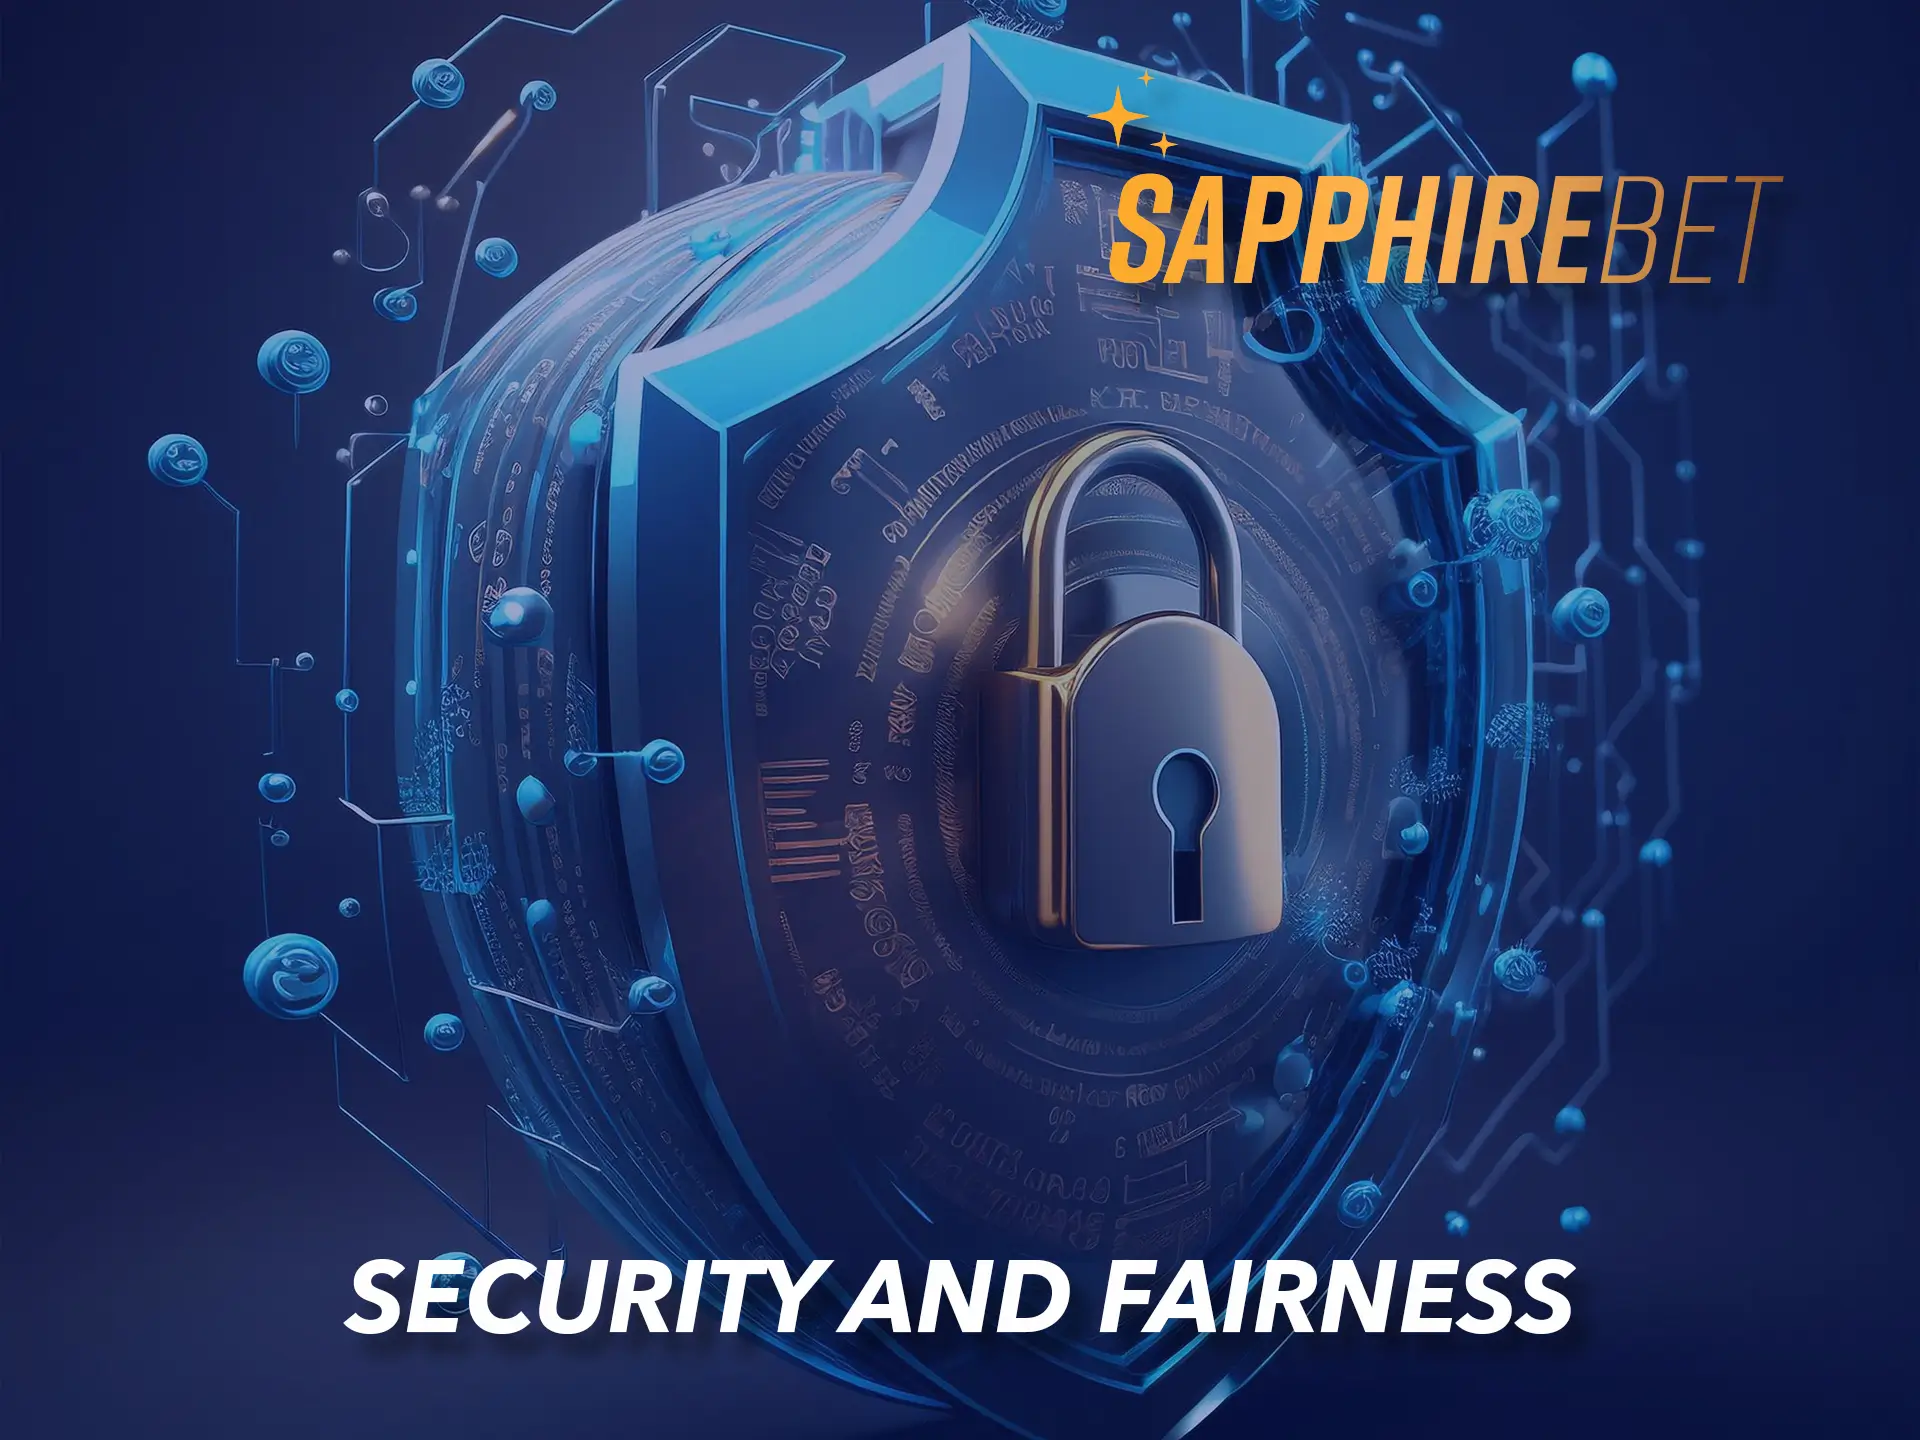 The Sapphirebet platform is perfectly protected from scammers.